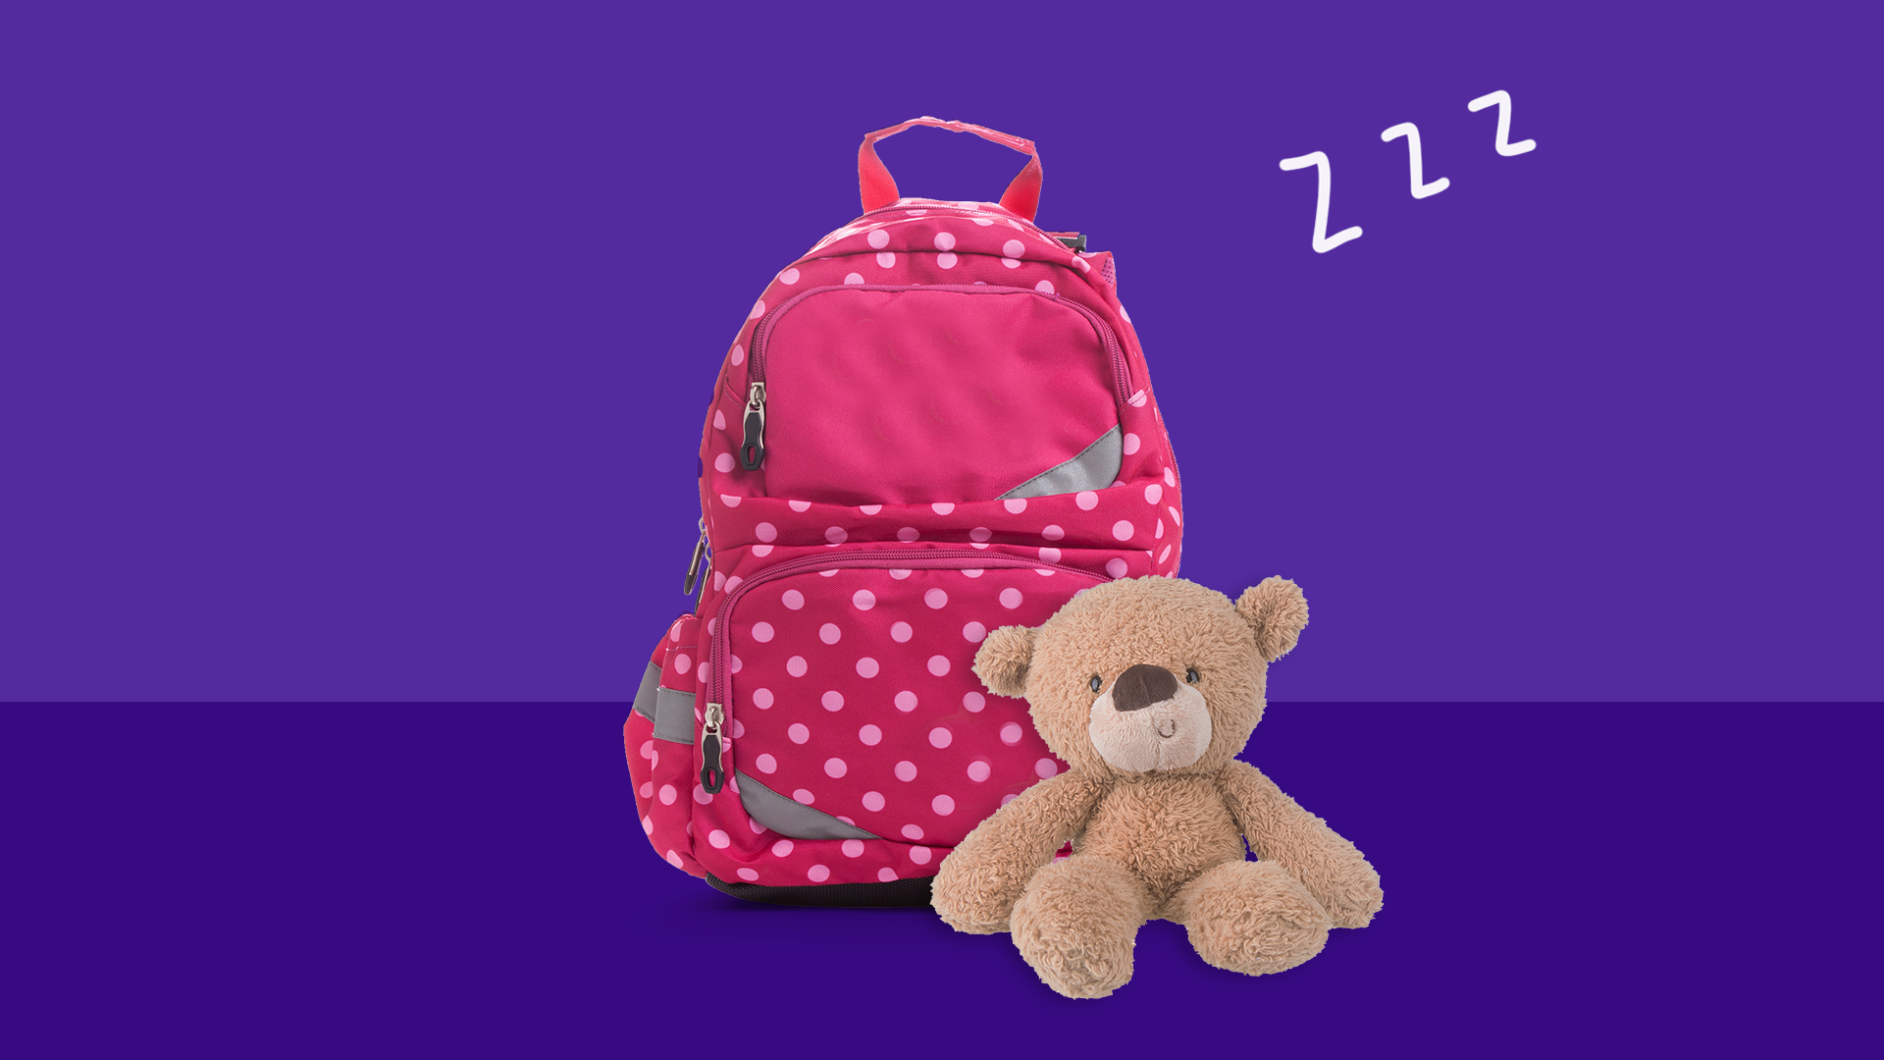 A backpack and teddy bear represent sleepovers for children with juvenile diabetes